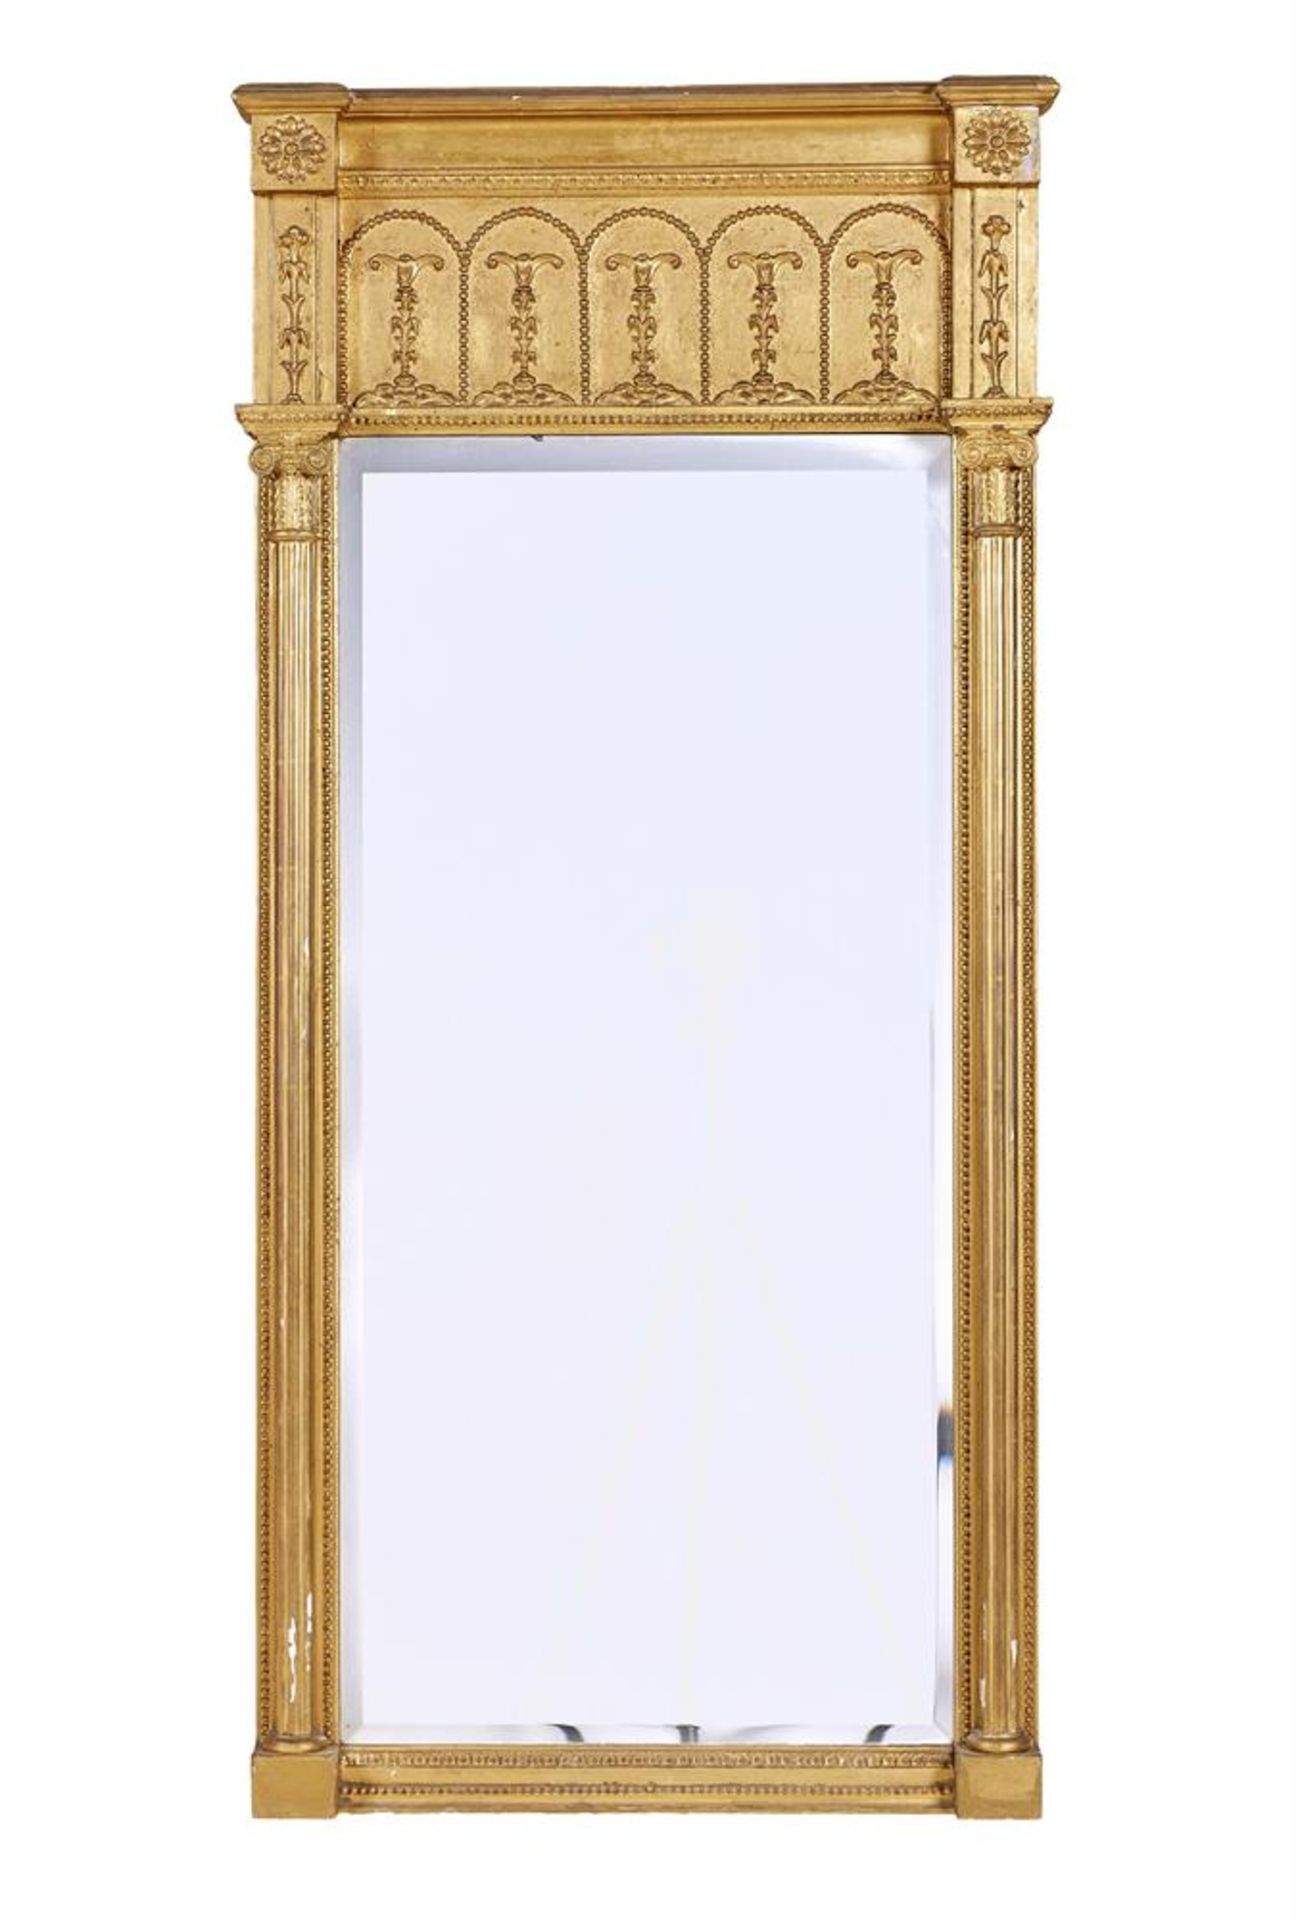 A REGENCY GILTWOOD AND GESSO OVERMANTLE MIRROR EARLY 19TH CENTURY